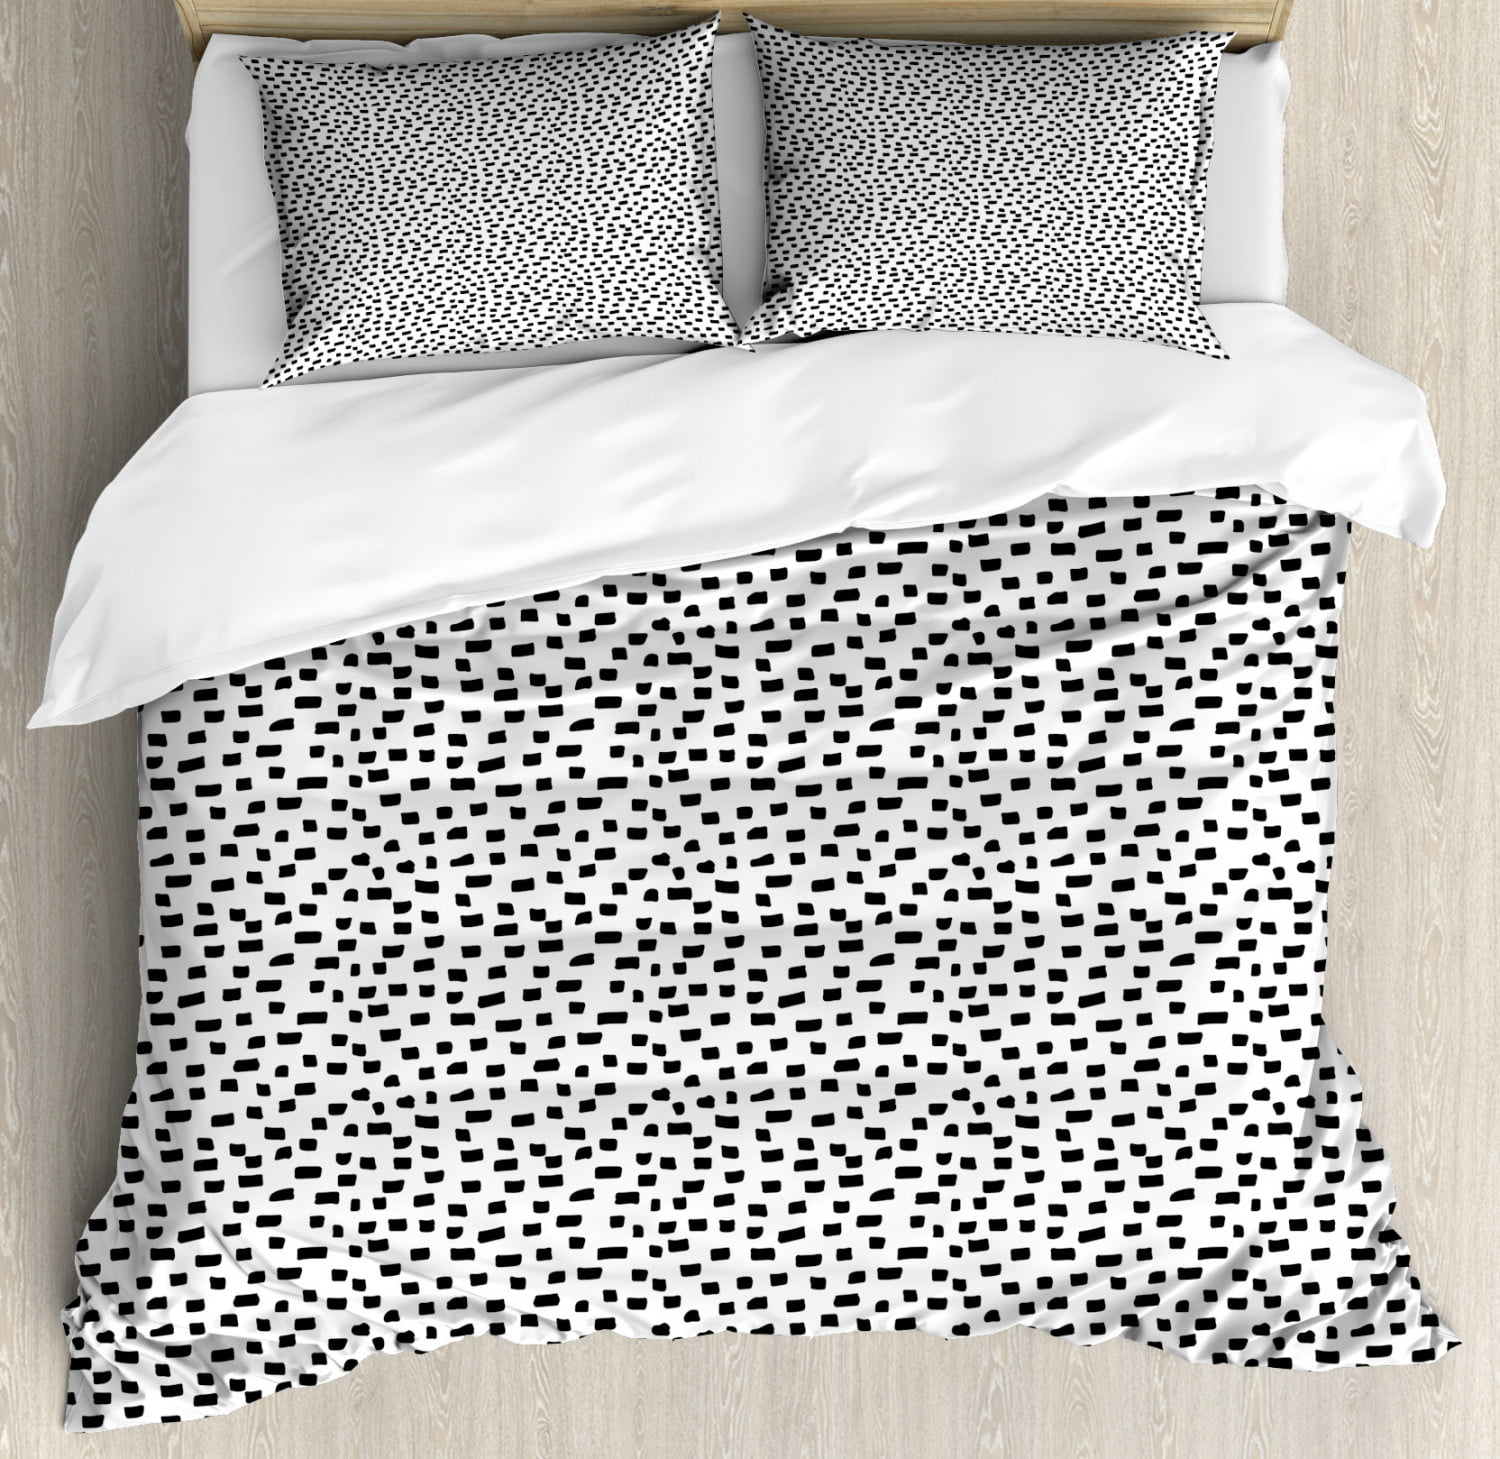 Black And White Duvet Cover Set King Size Monochrome Abstract